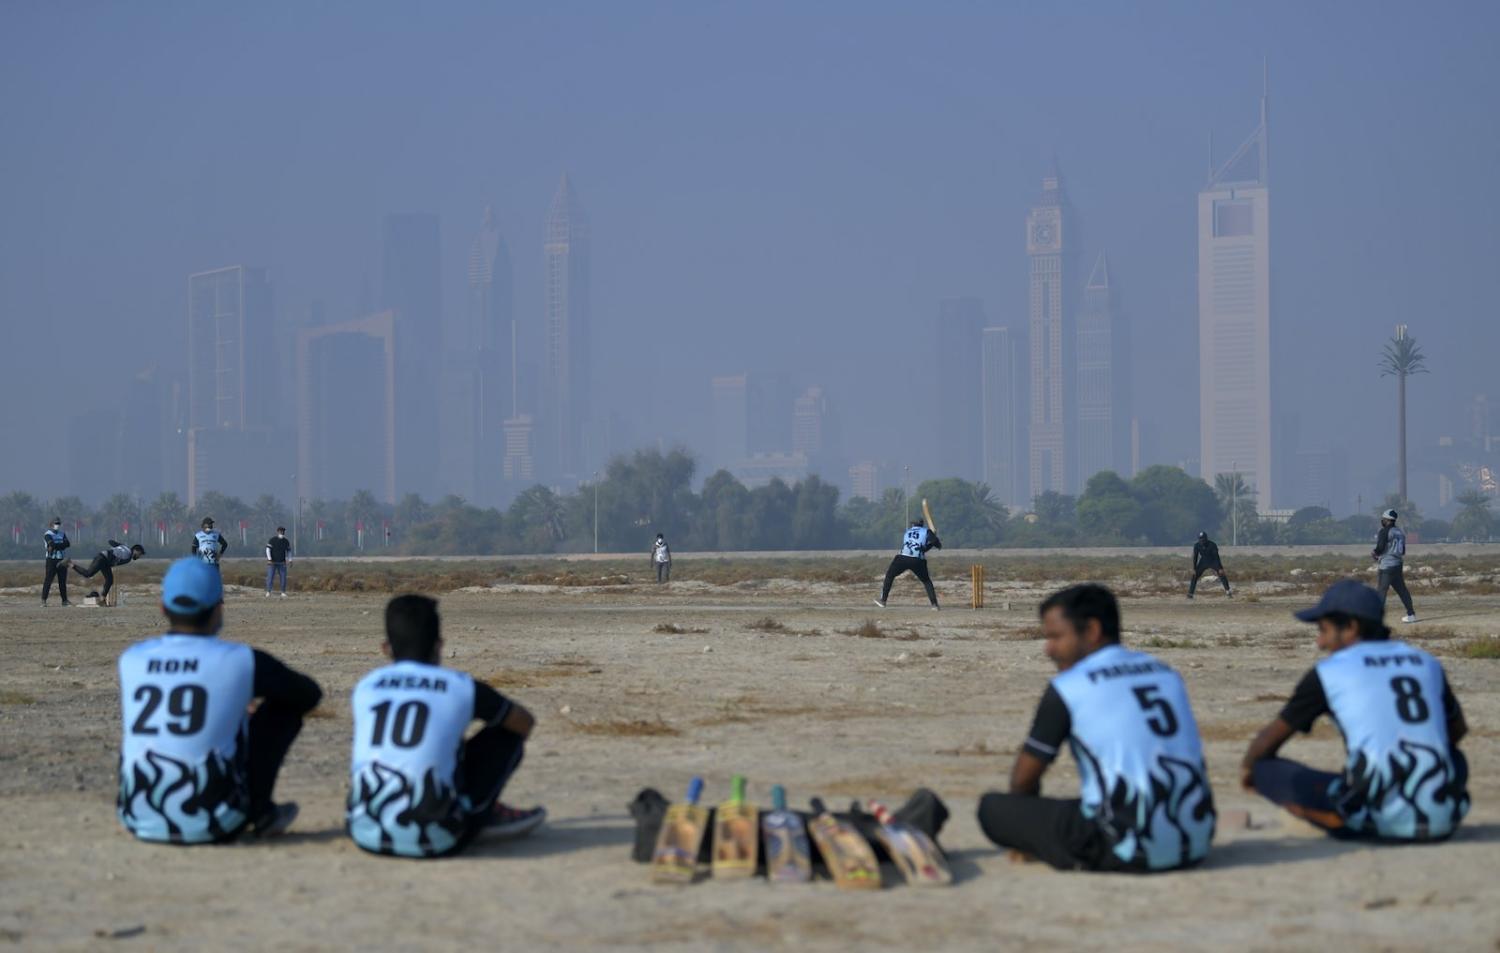 Workers in Dubai play cricket on their day off, 4 December 2020 (Karim SAHIB/AFP via Getty Images)